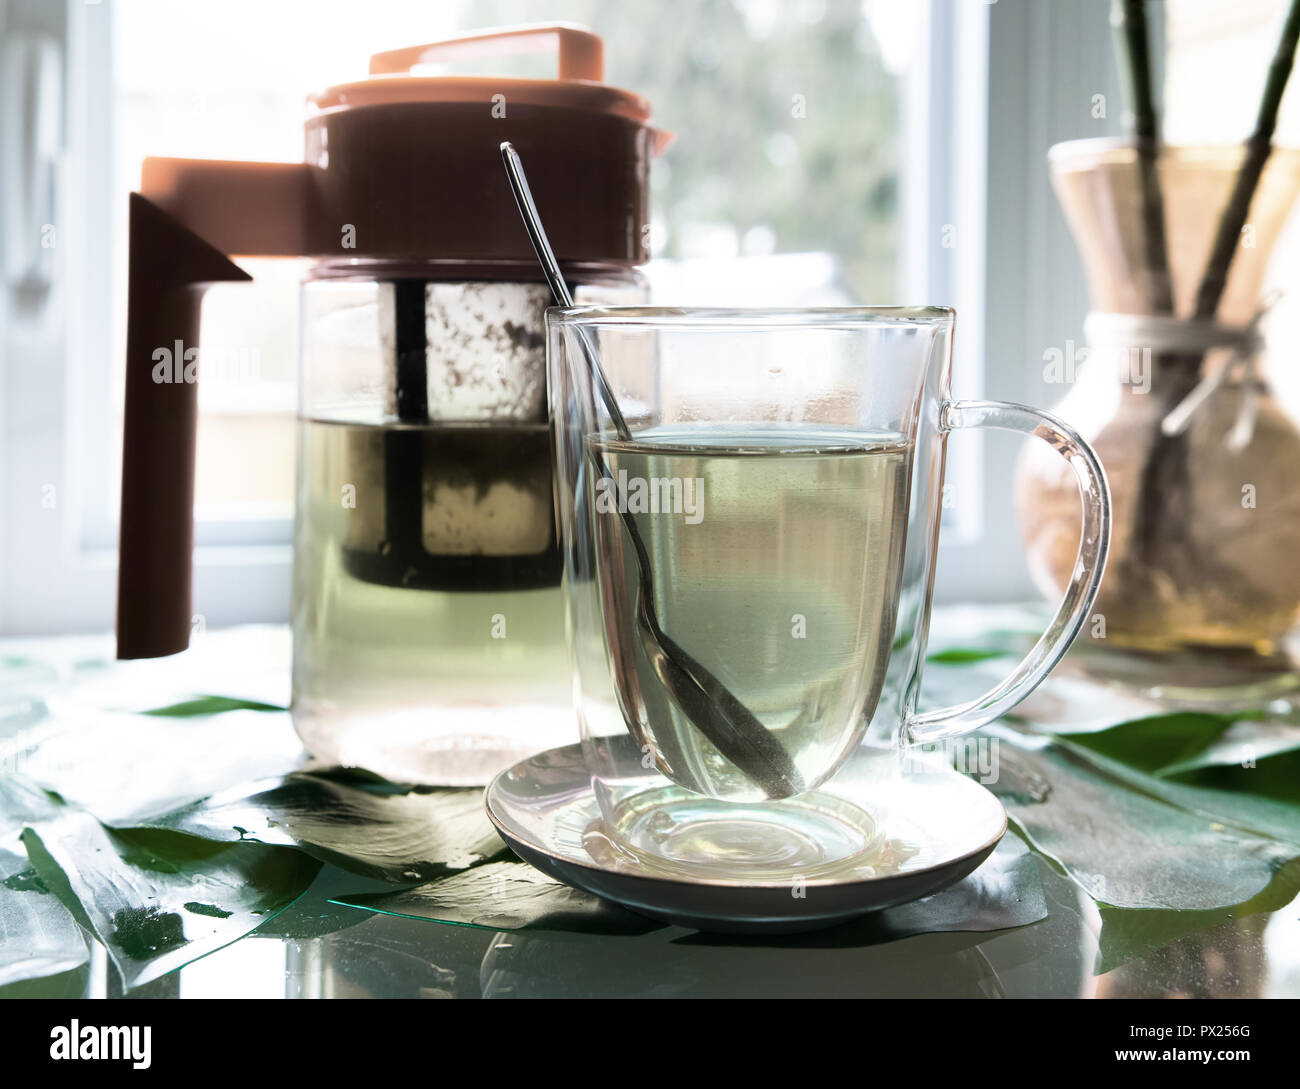 In front of the window there is a transparent pot of tea as well as a cup of tea with the spoon in it. Stock Photo